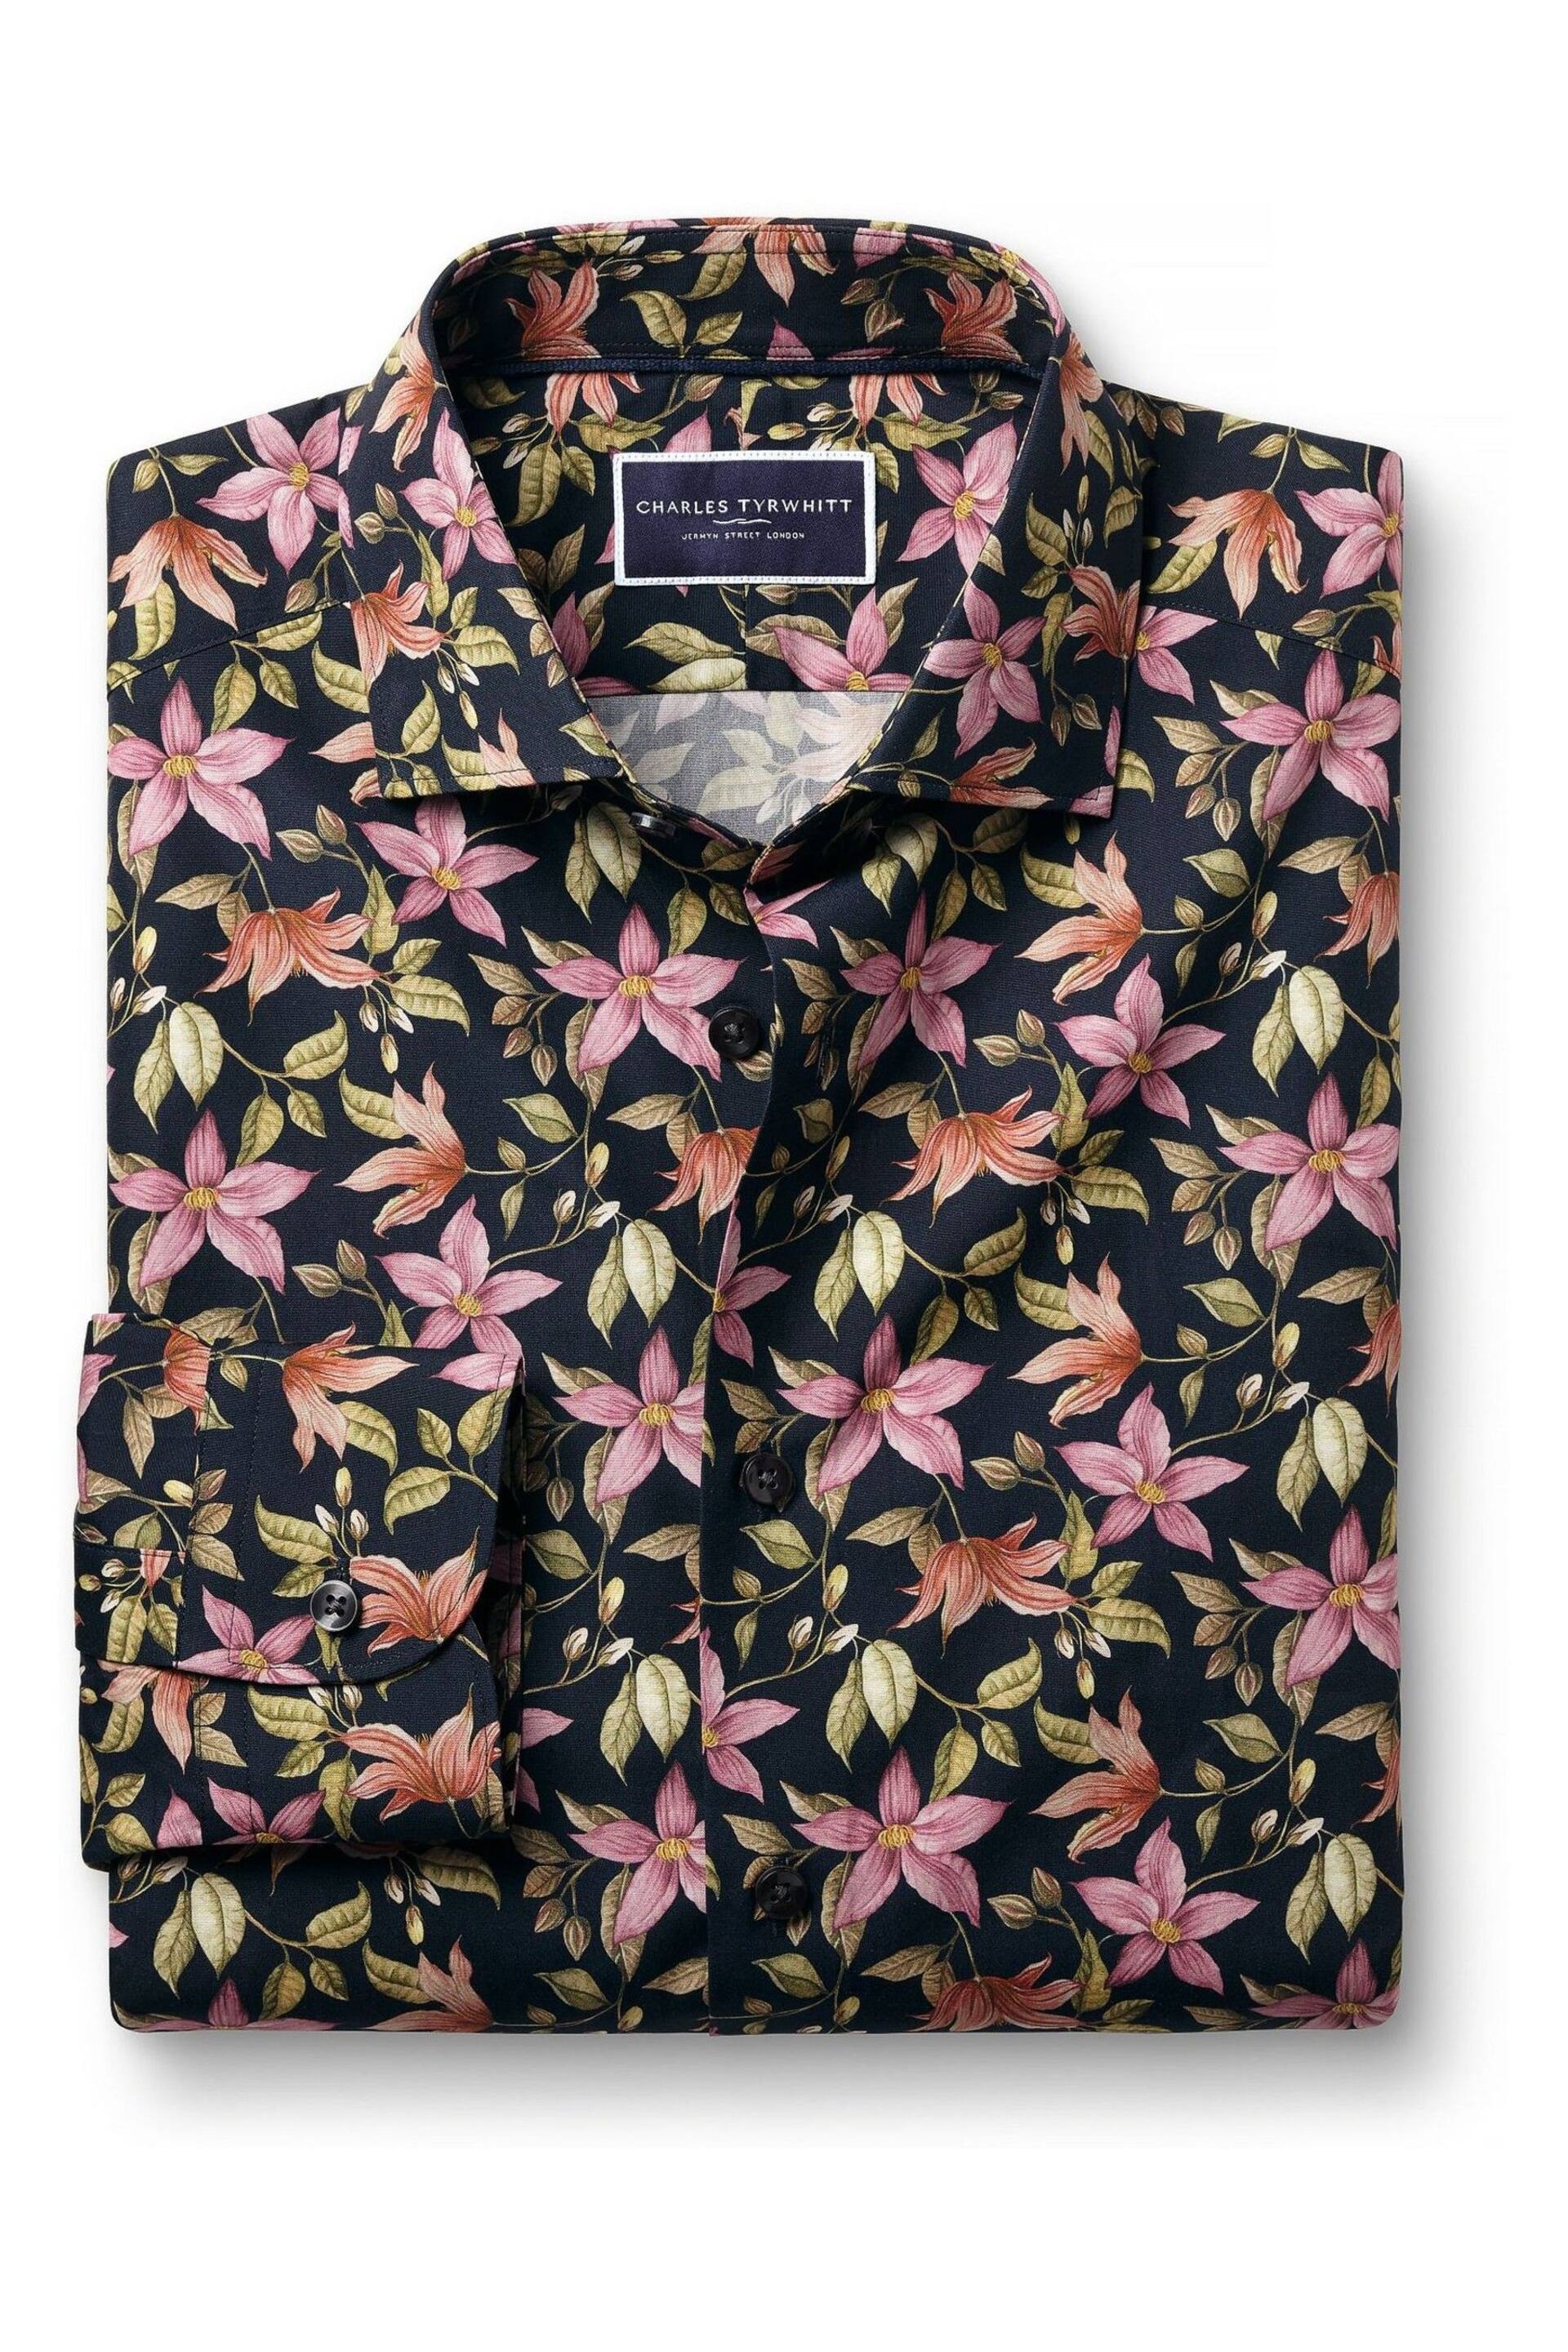 Charles Tyrwhitt Blue Classic Fit Liberty Fabric Floral Print Shirt - Image 3 of 5